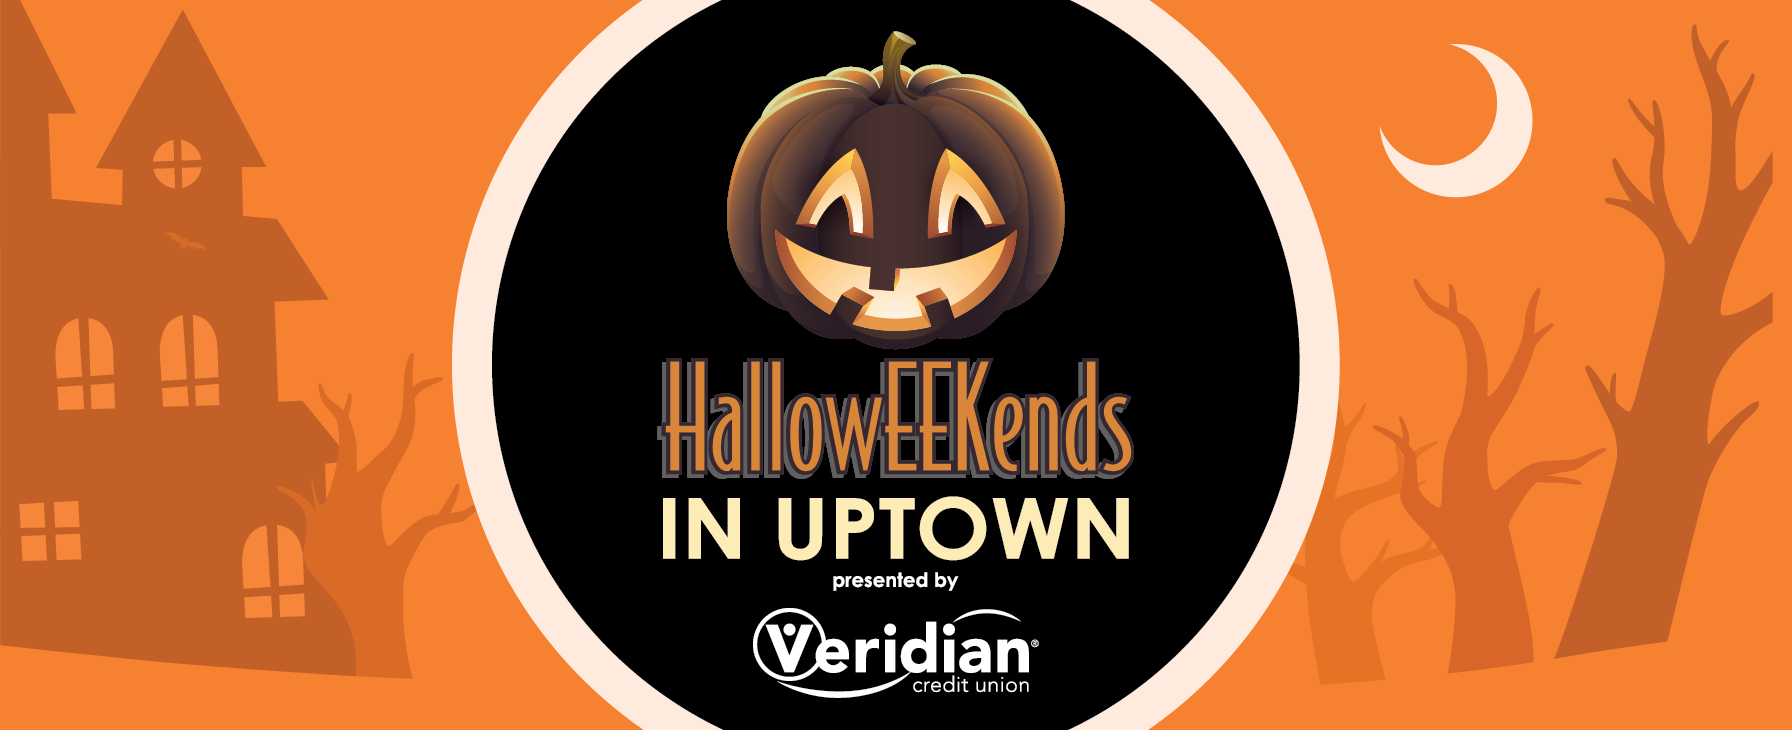 Halloweekends in Uptown presented by Veridian Credit Union